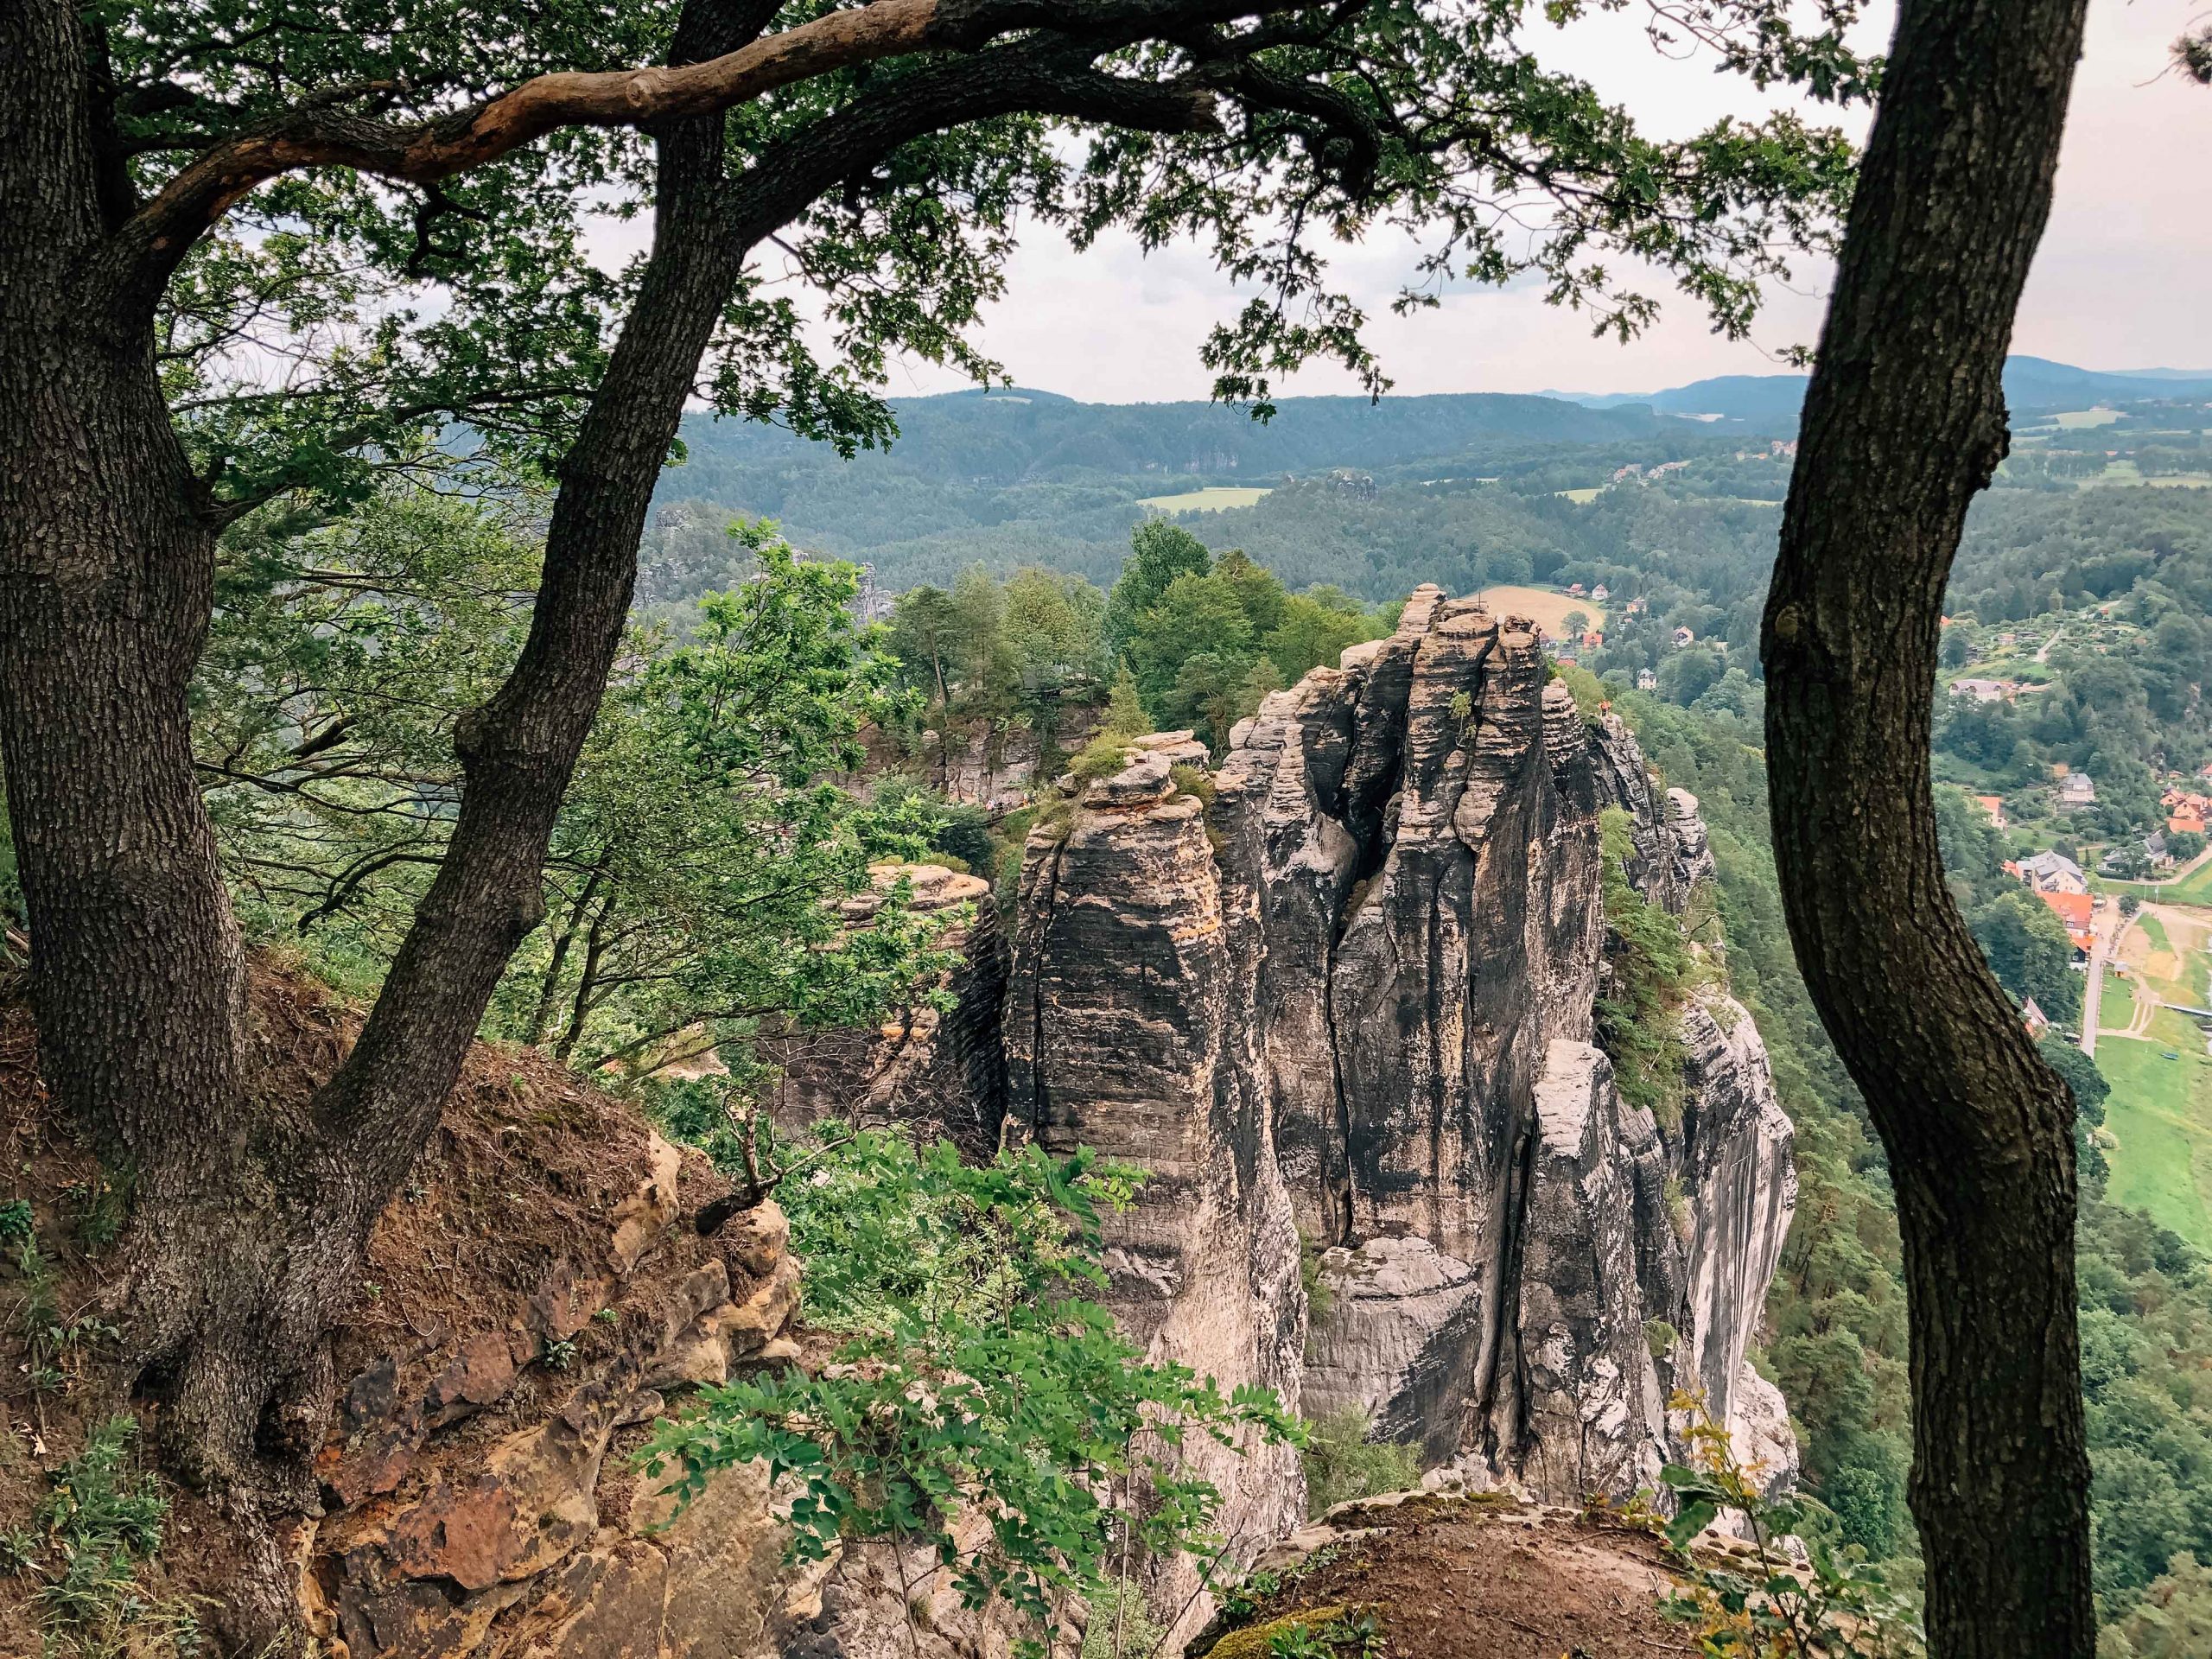 Nature at its finest during the visit at Bastei in Germany